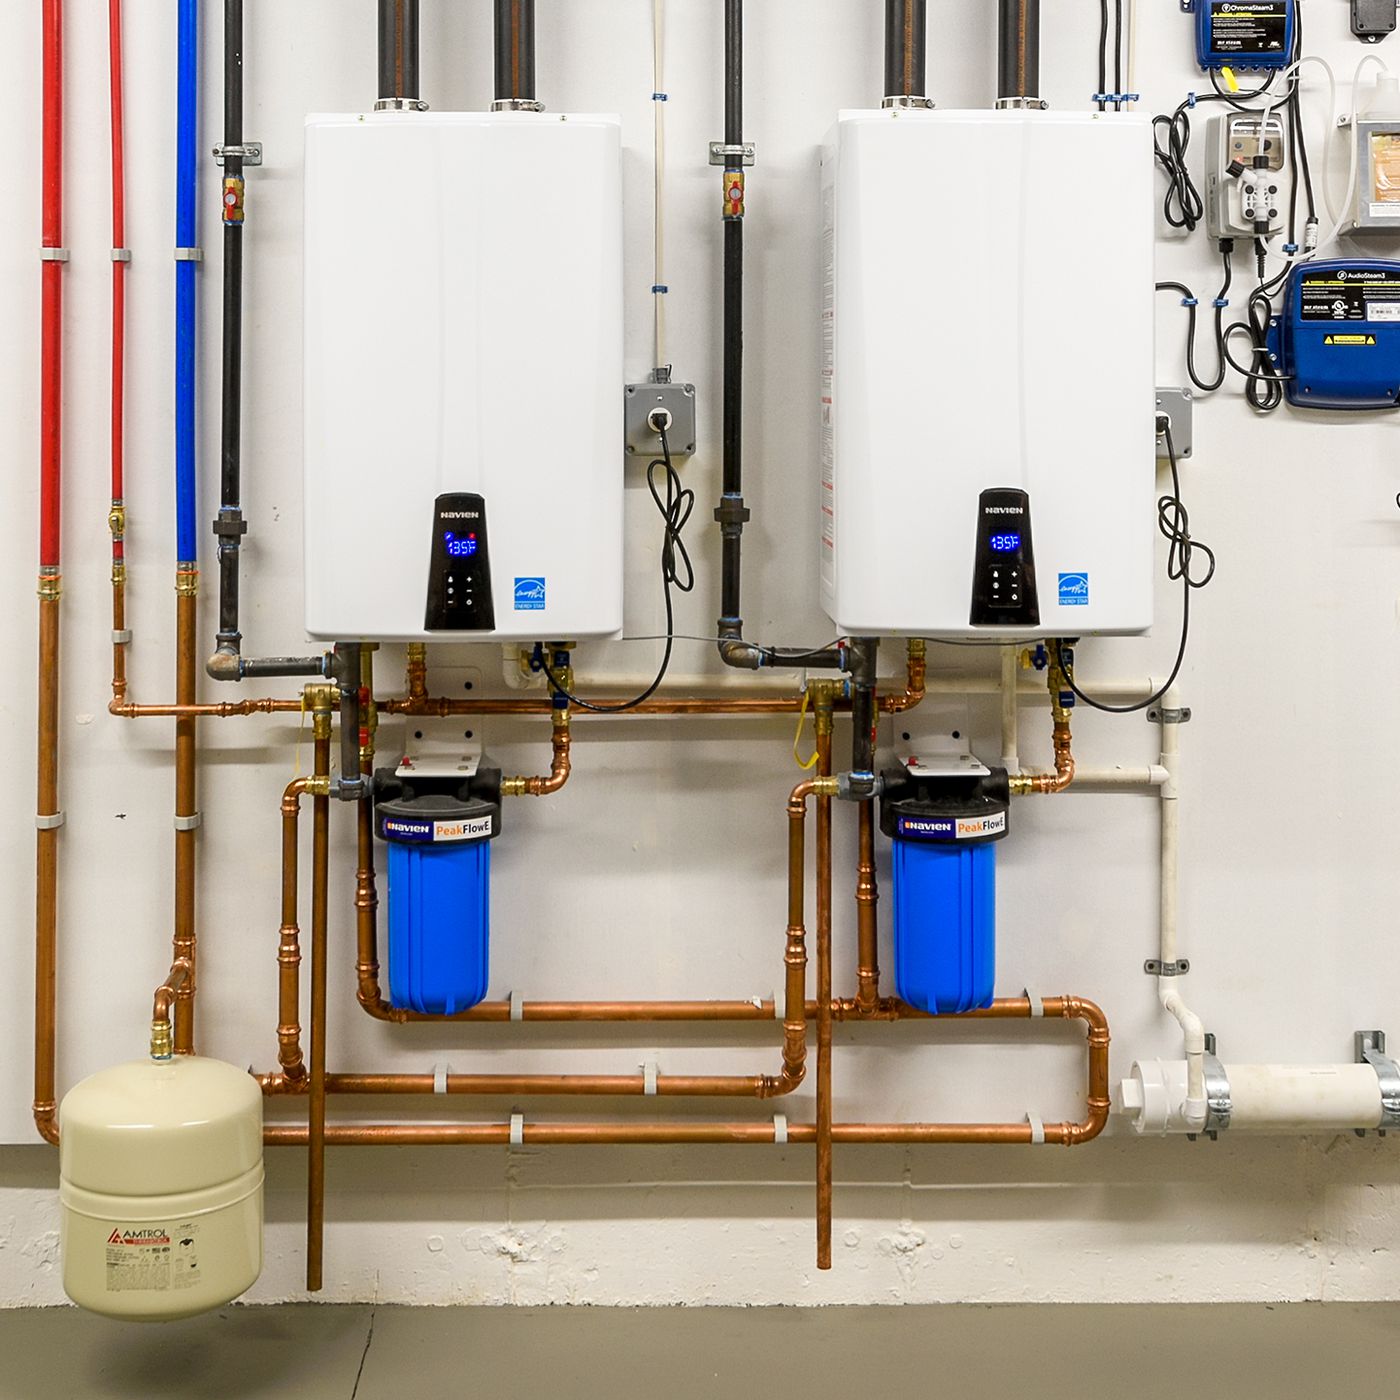 What is the Typical Lifespan of a Tankless Water Heater? 